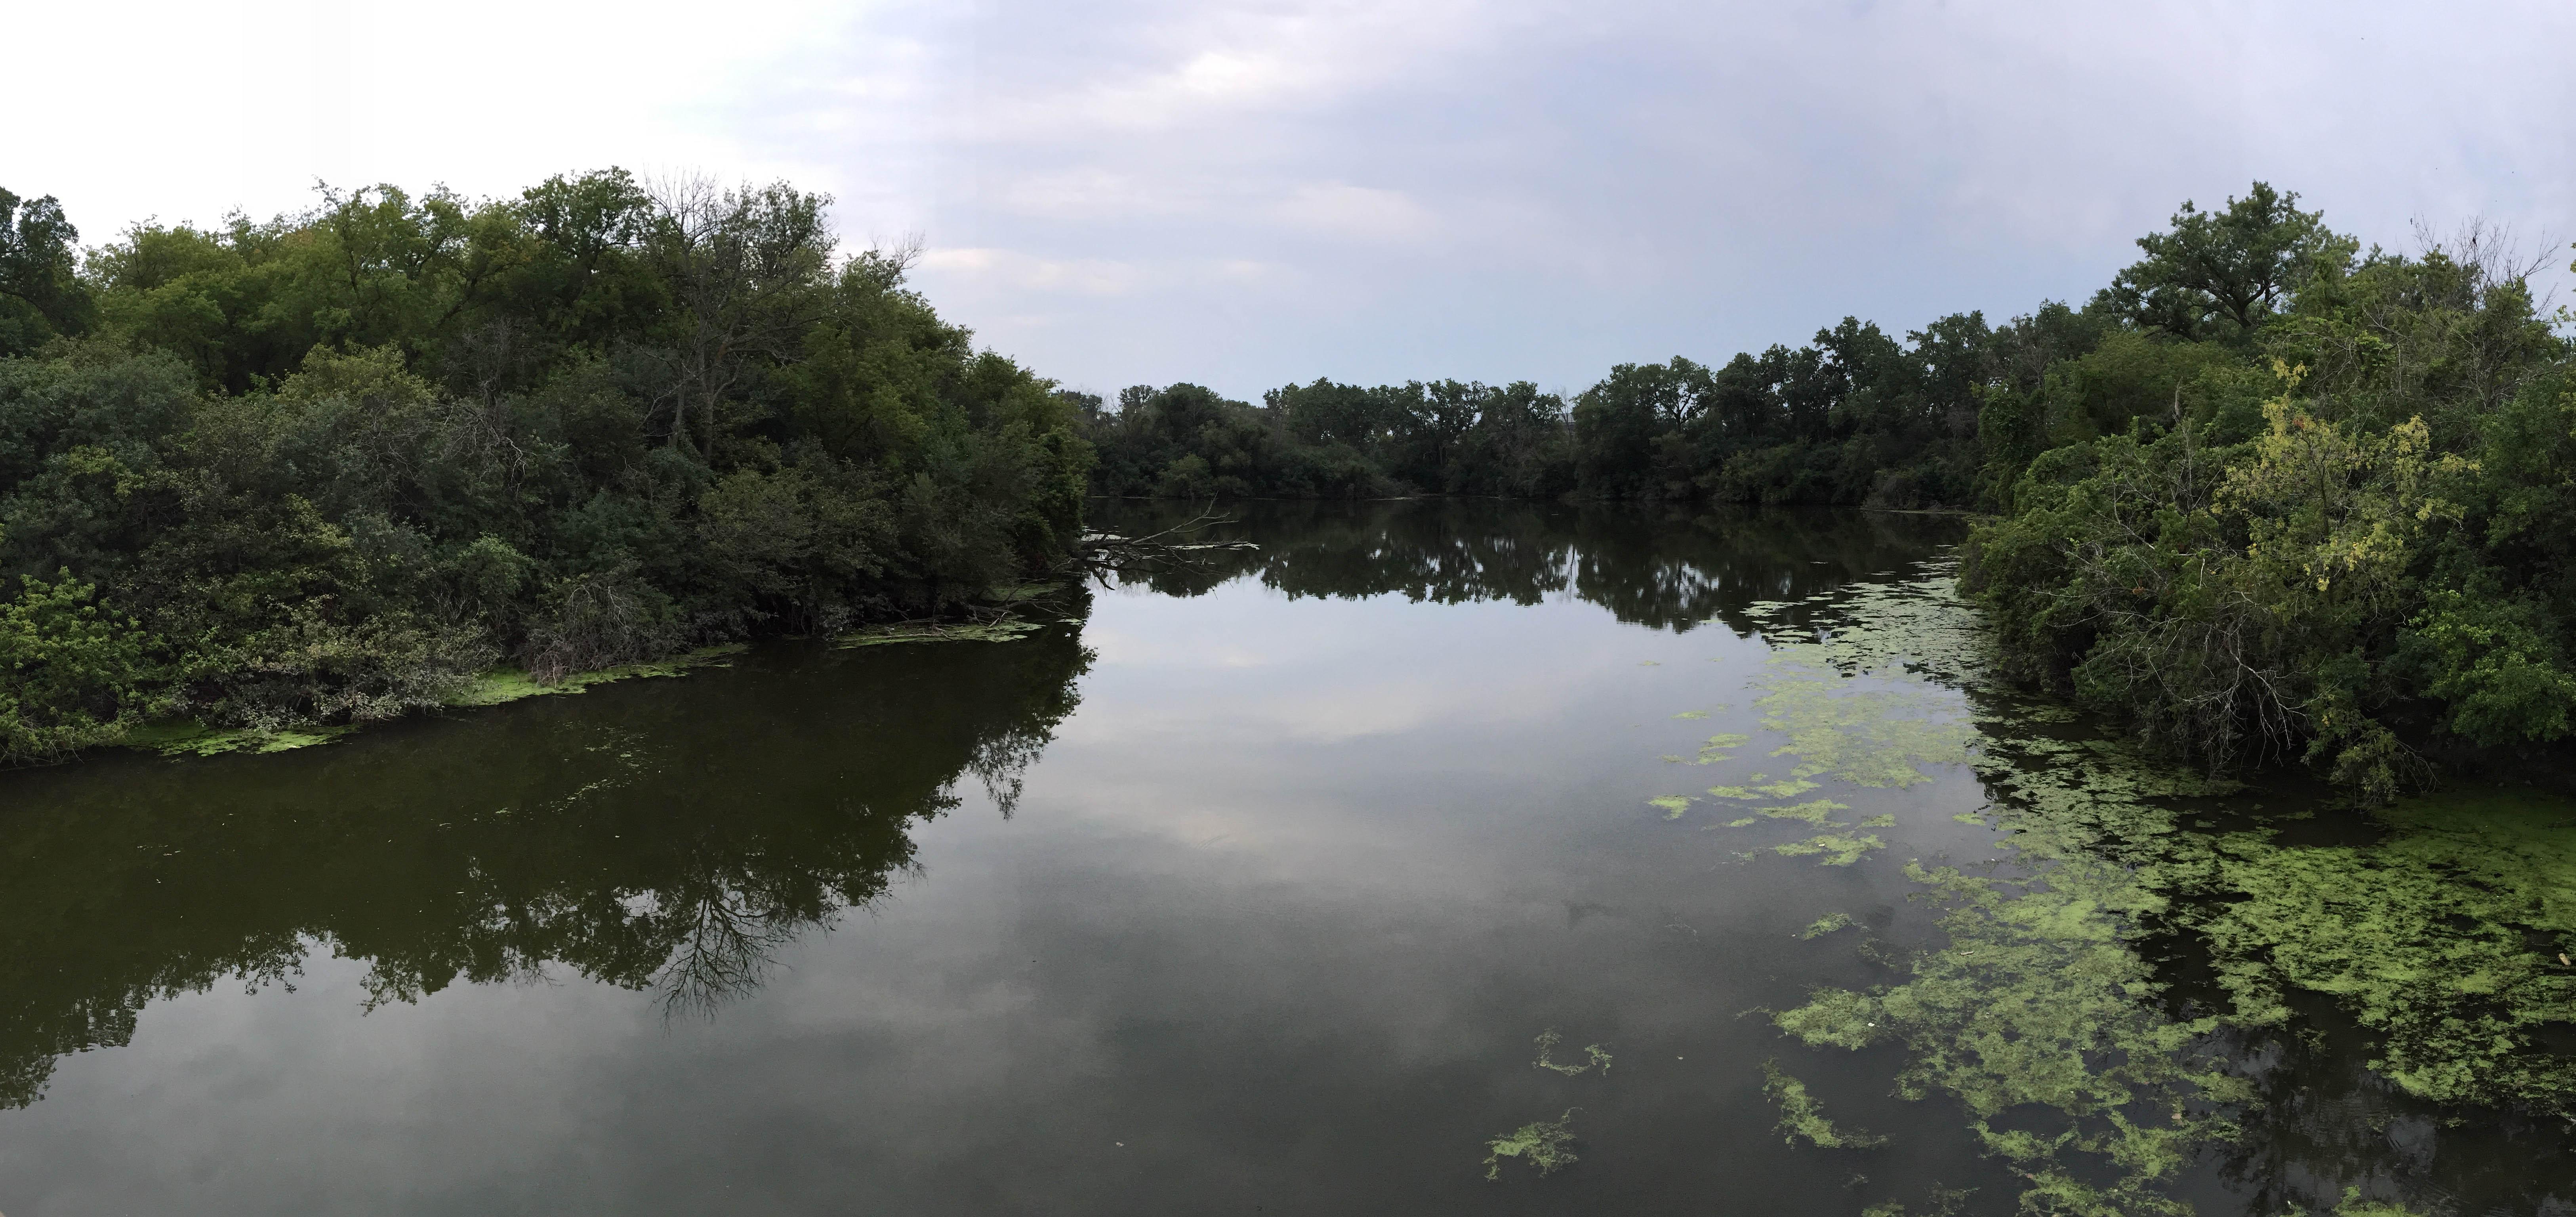 The North Branch Trail system winds along the Chicago River and the Skokie Lagoons. (Evan Garcia / Chicago Tonight)